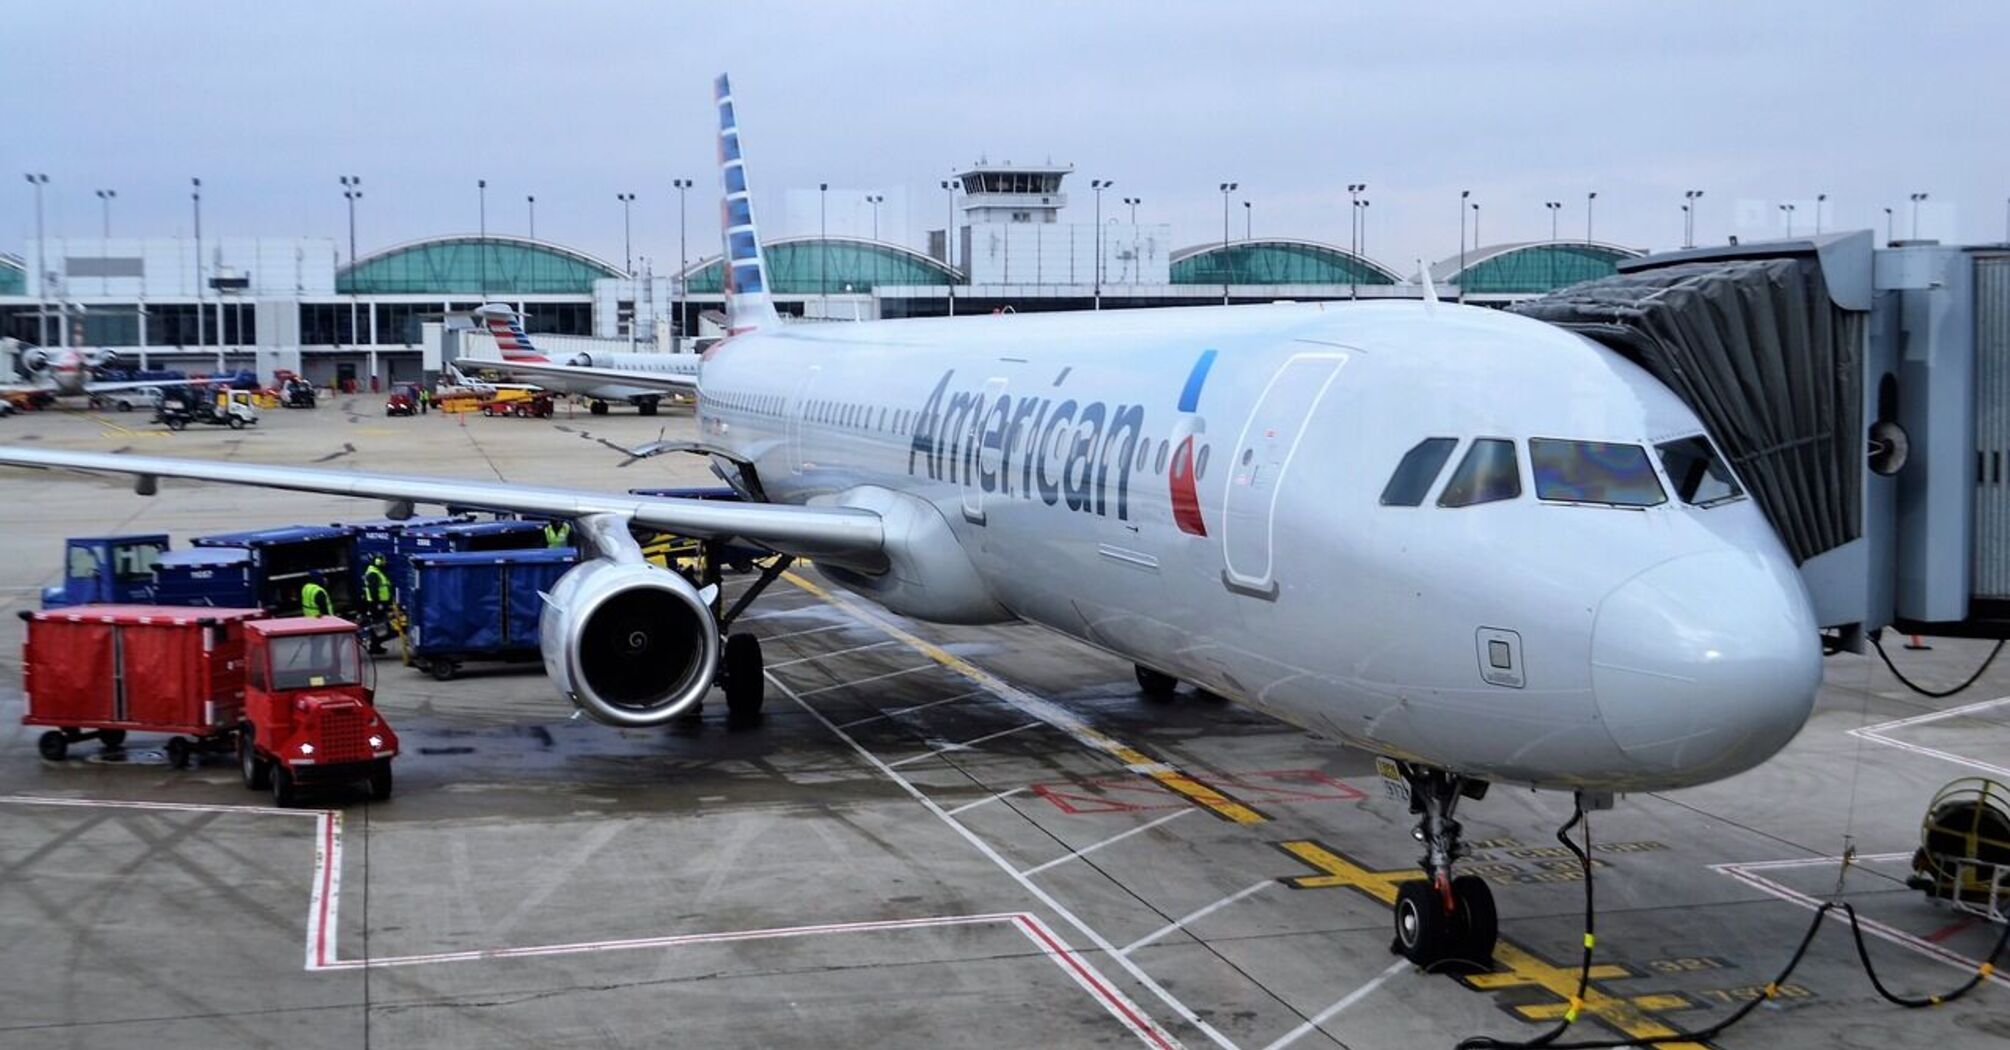 American Airlines faces a strange accusation: a passenger claims his forgotten jacket was "burned"